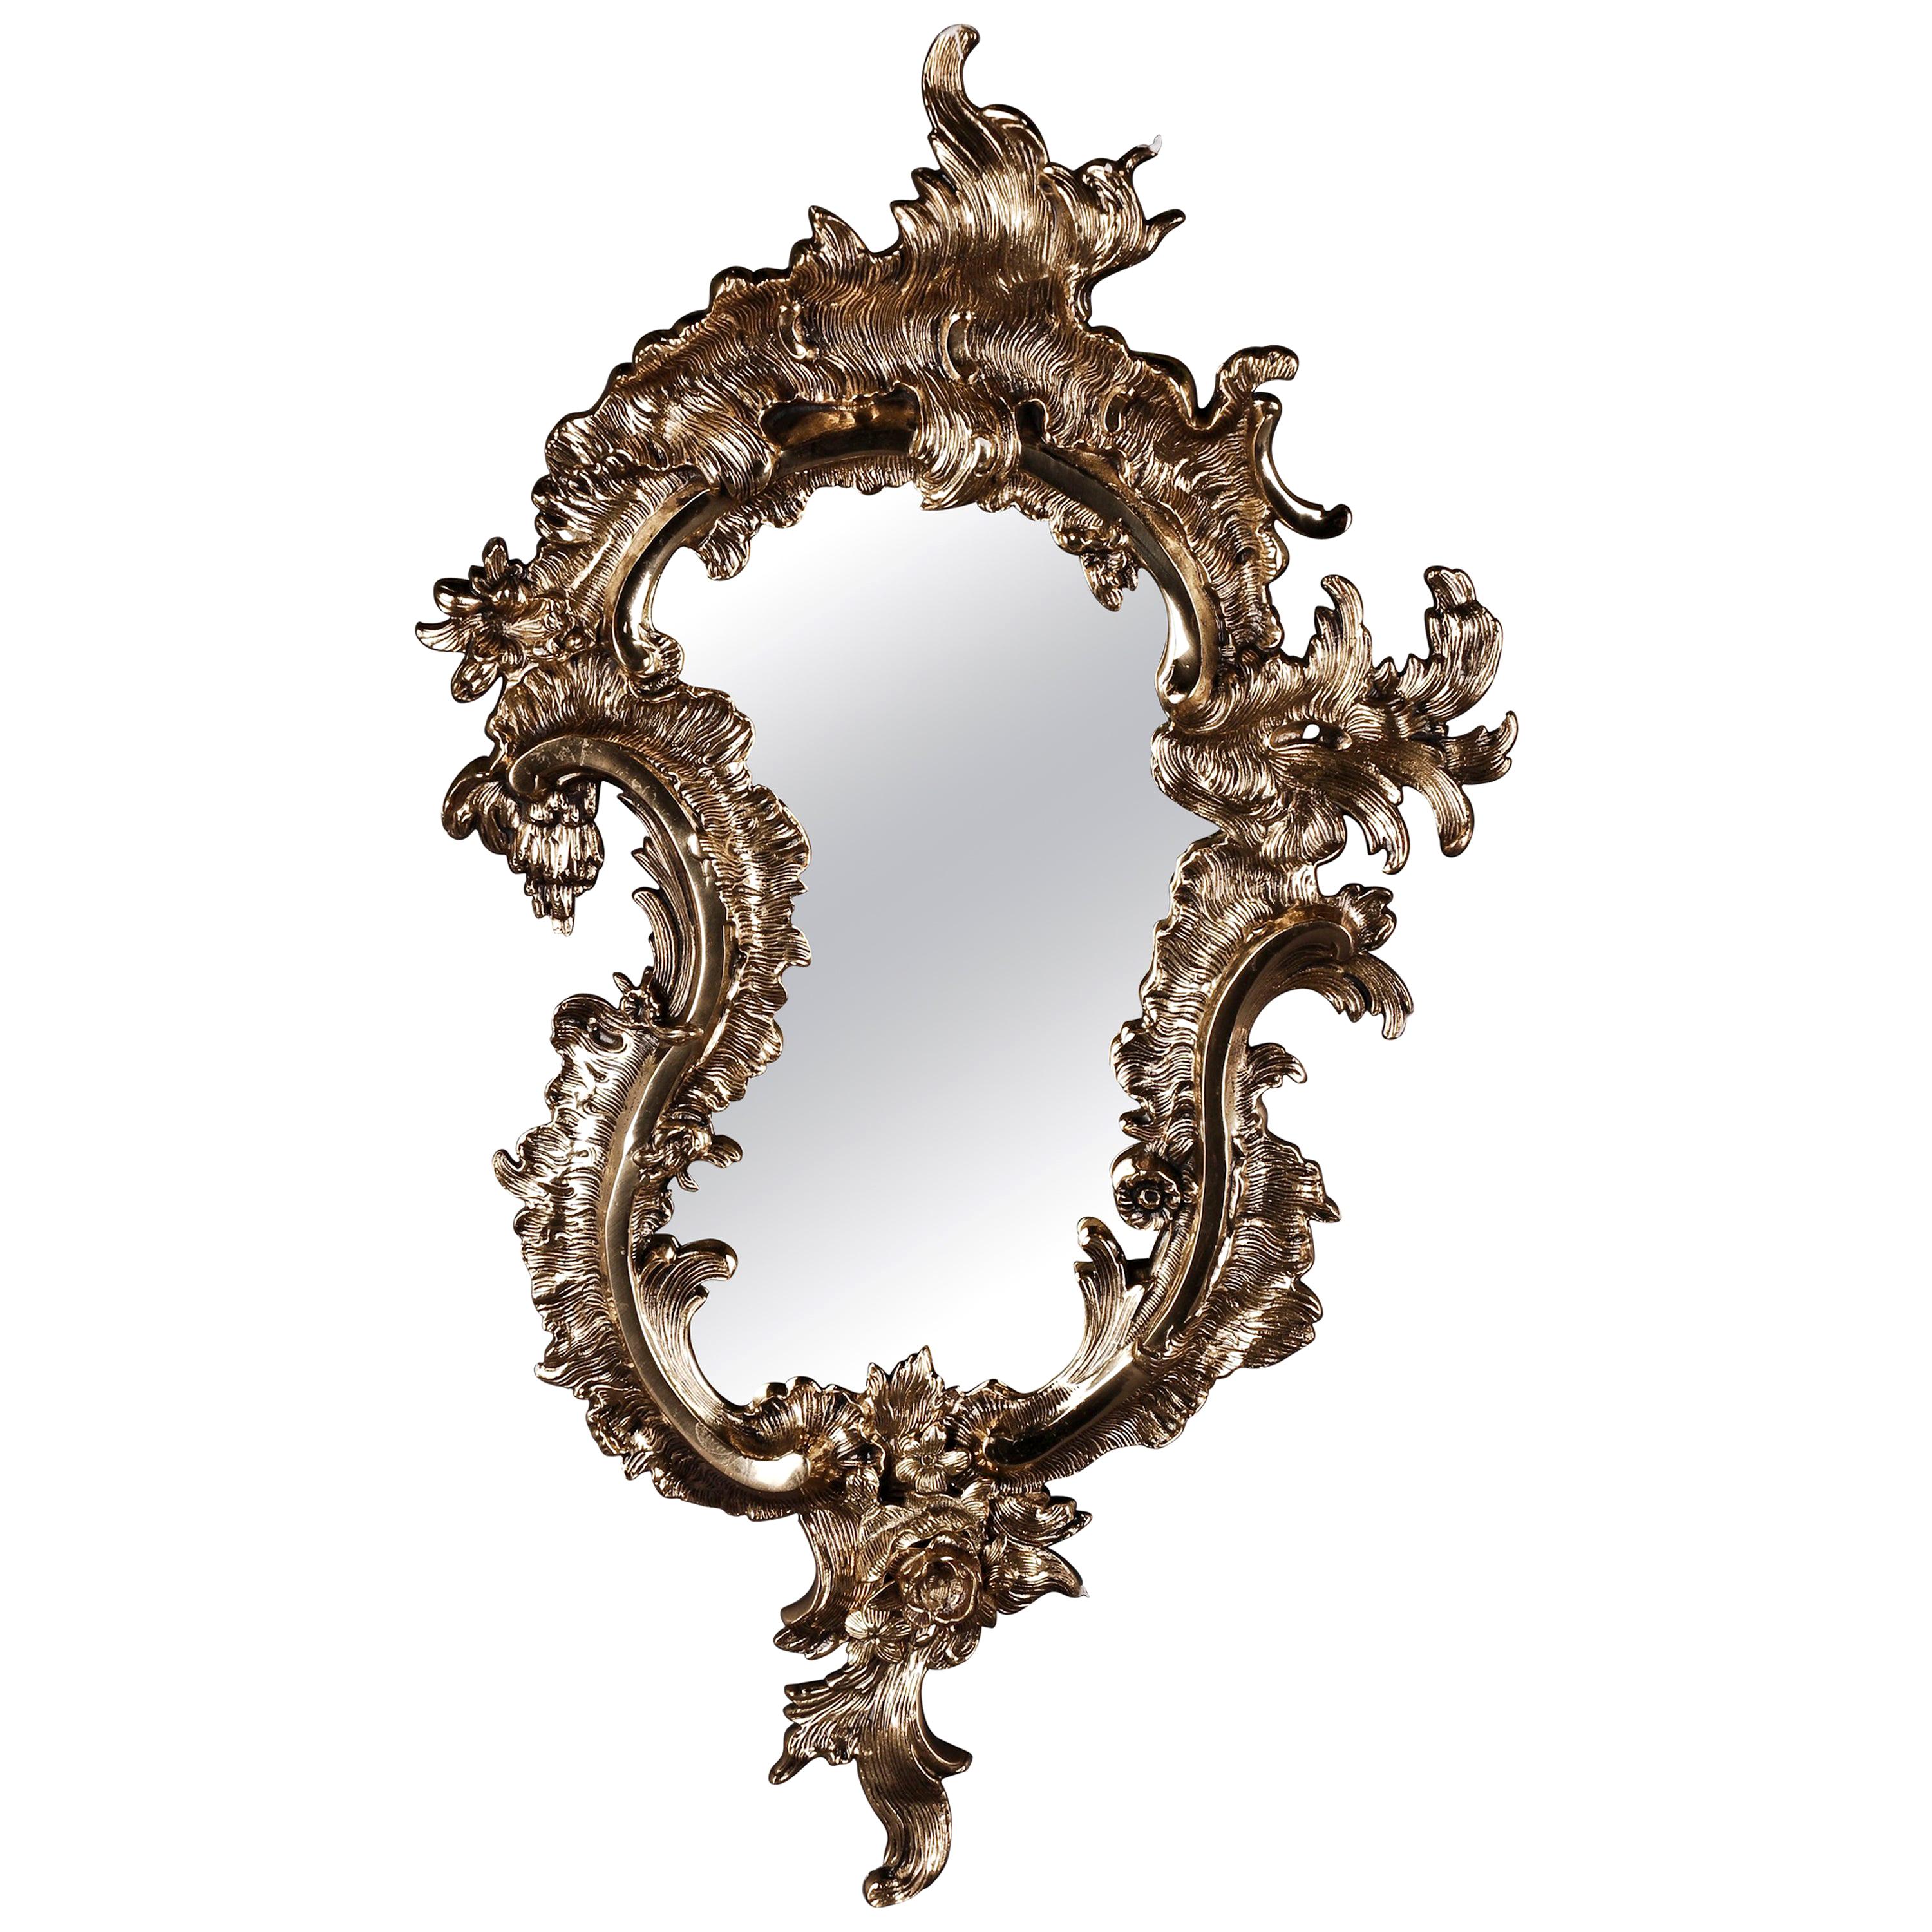 20th Century Rococo Style Rocaille-Formed Wall Mirror For Sale